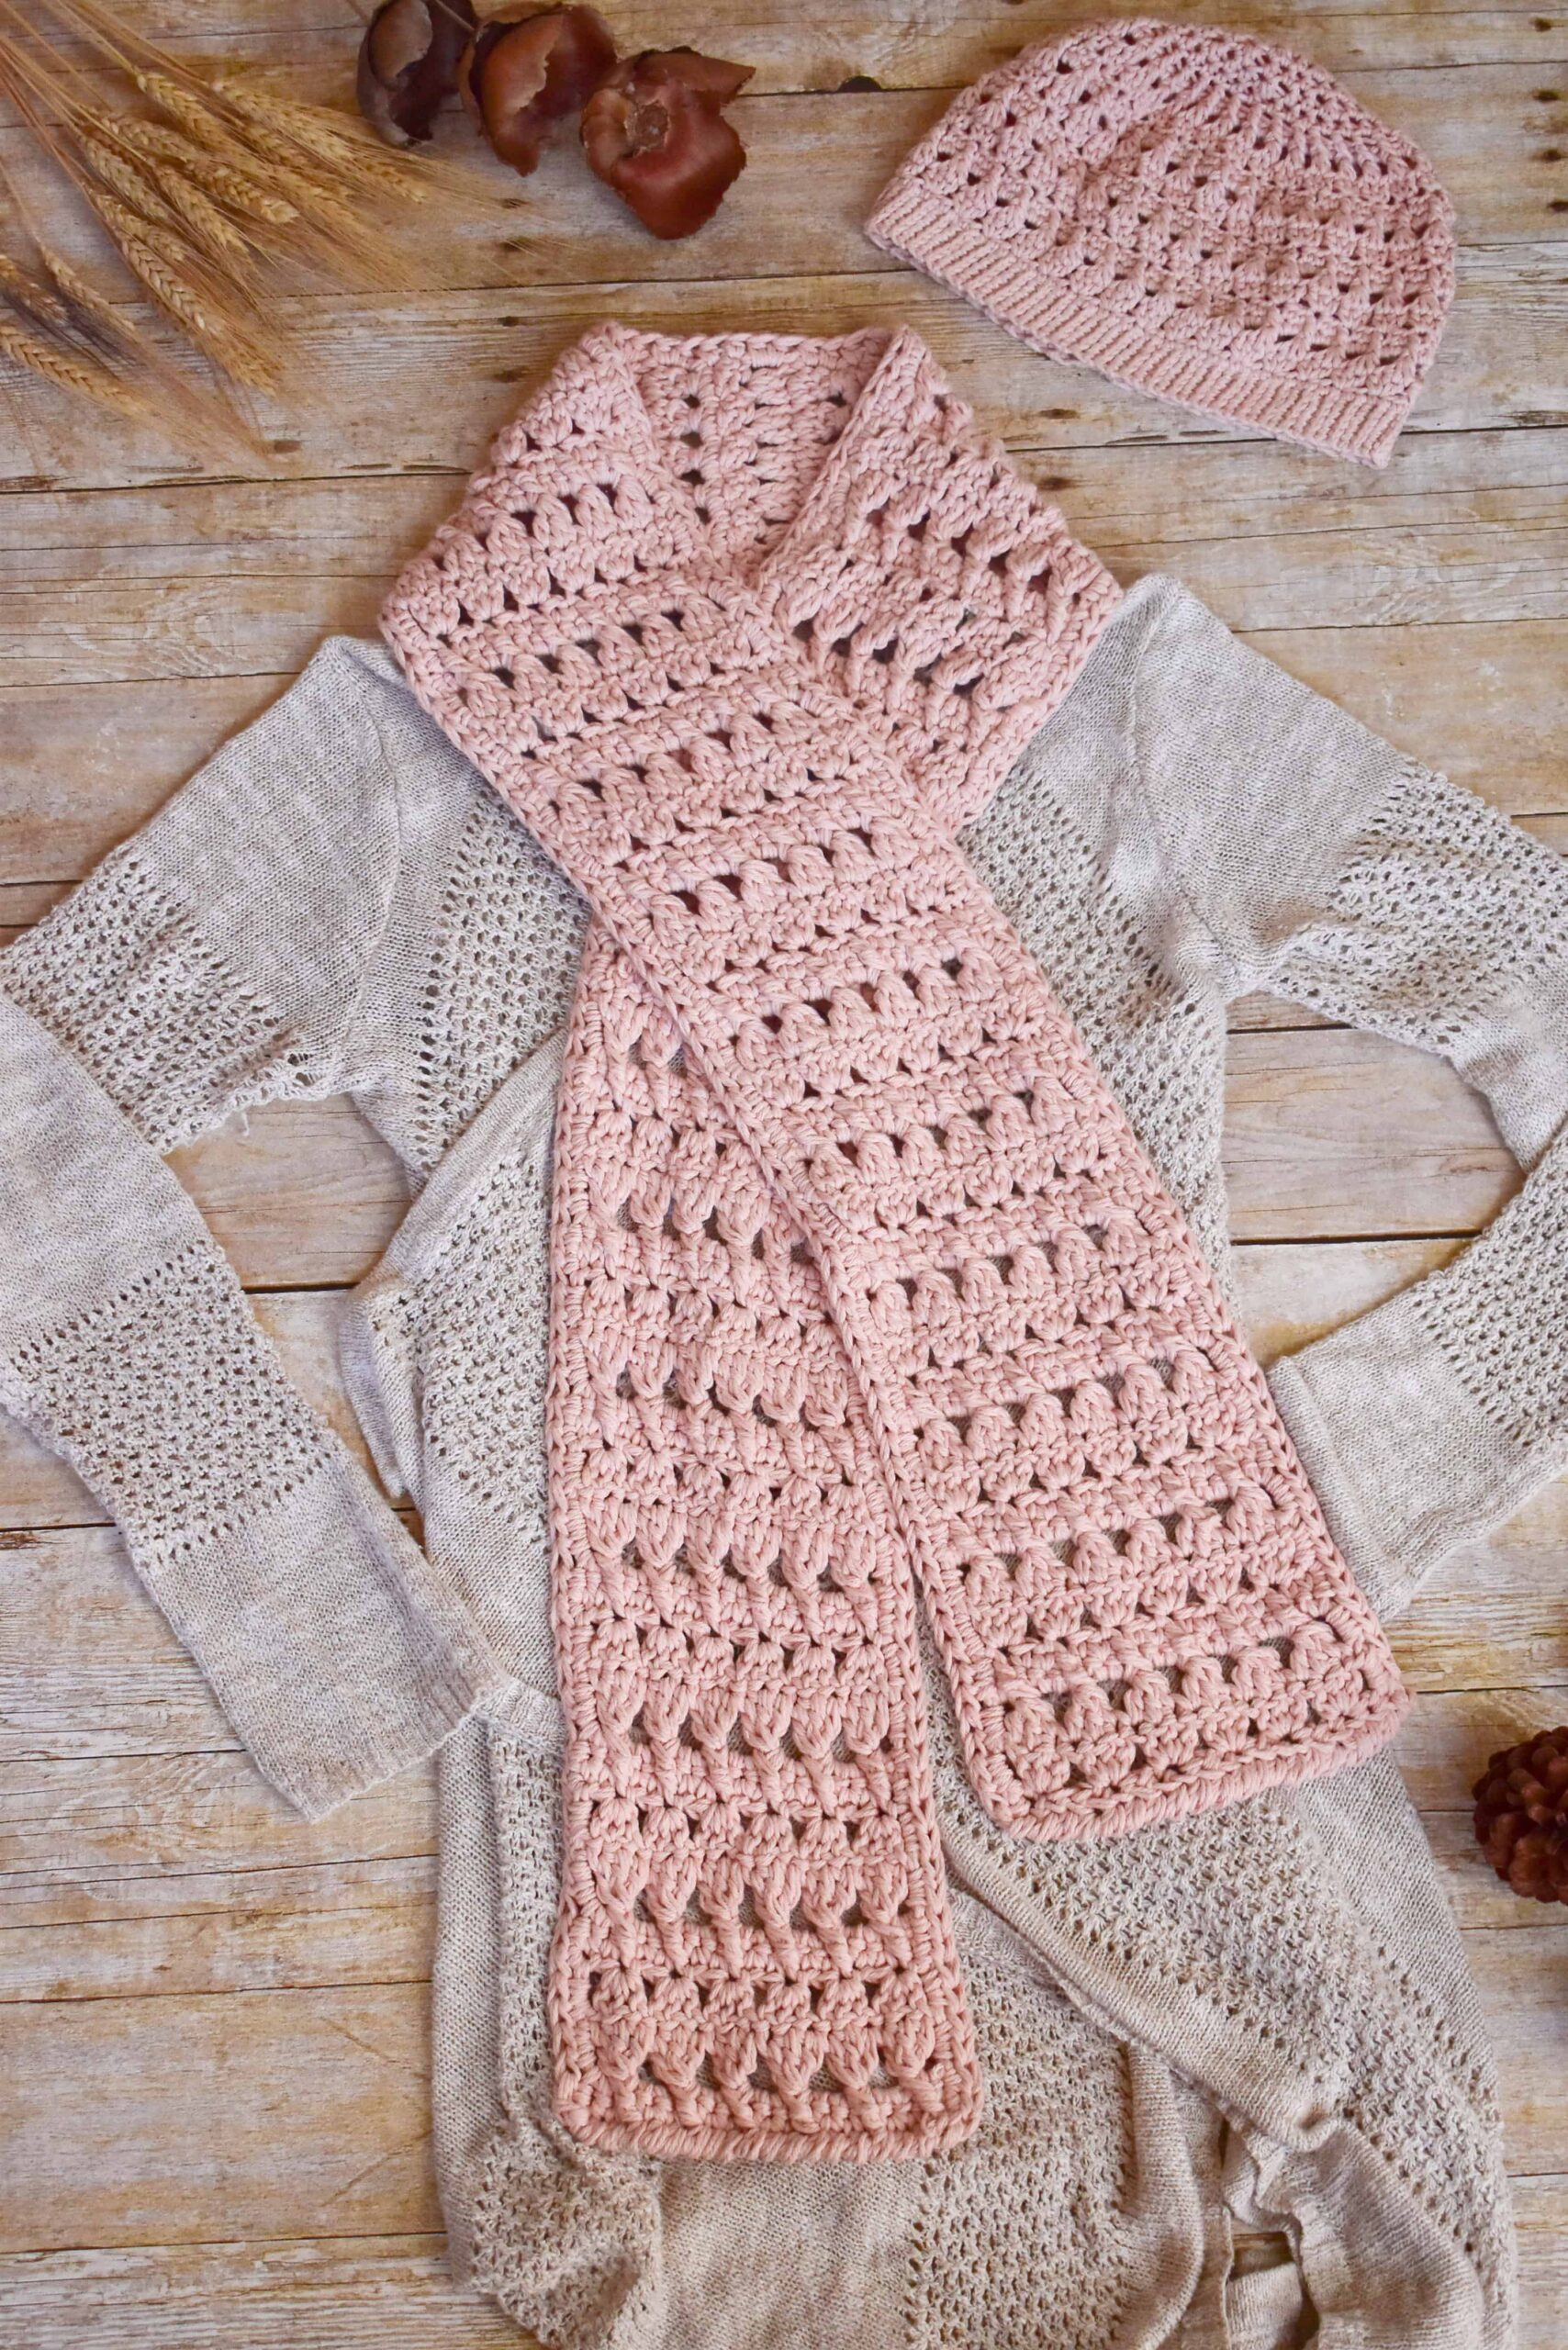 Winter Blush beanie and scarf on wood floor